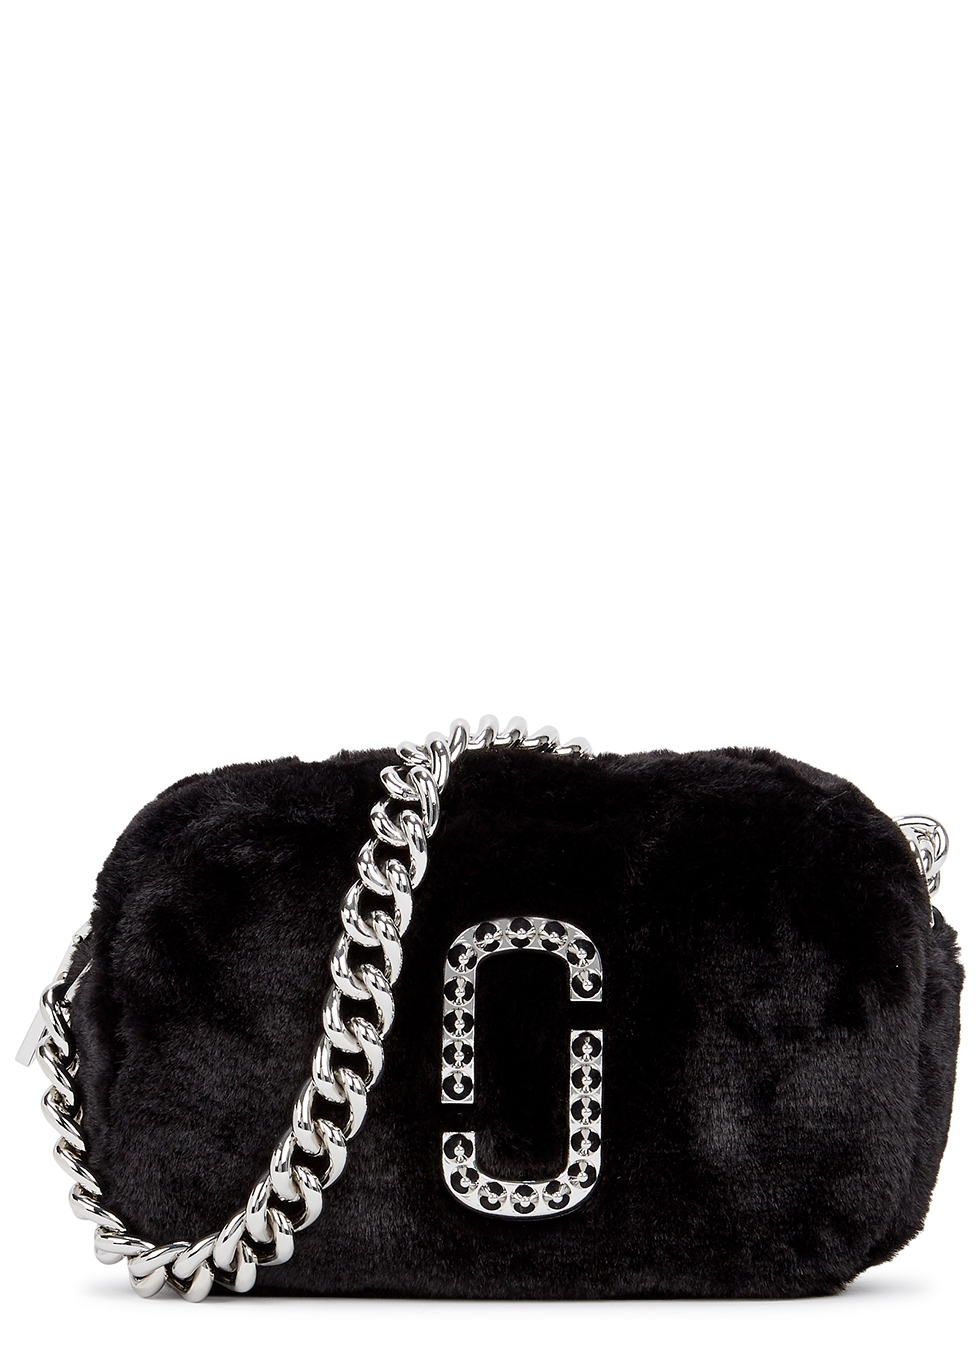 SNAPSHOT BAG WITH FAUX FUR STRAP - MARC JACOBS for WOMEN